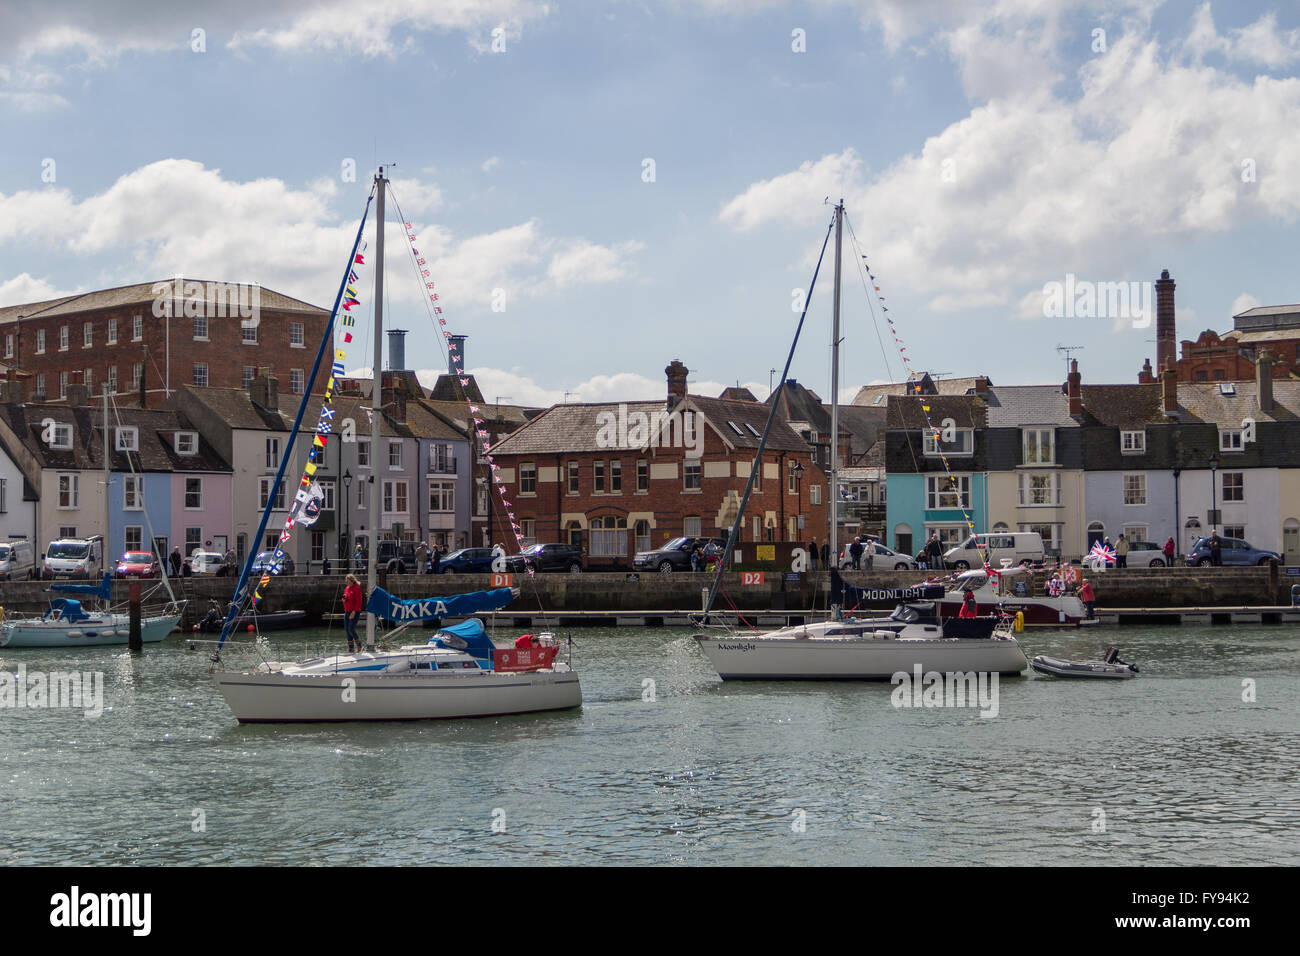 Weymouth, England. 23 April 2016. Queen's 90th Birthday Floating Tribute. Tikka and Moonlight returning. Credit:  Frances Underwood/Alamy Live News Stock Photo